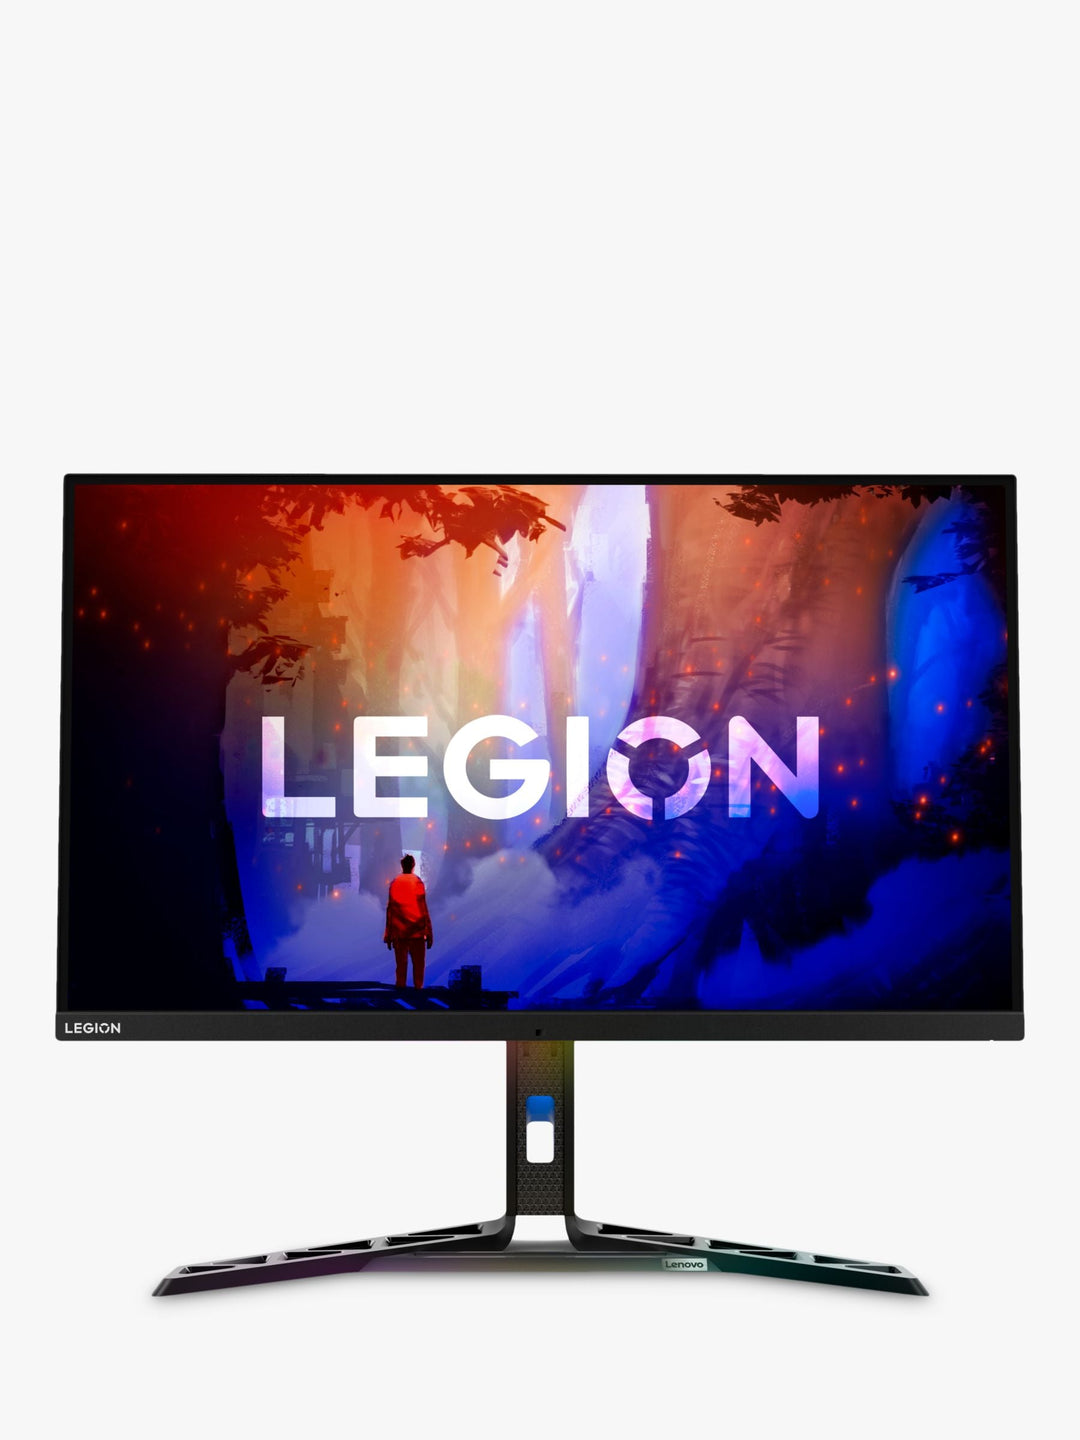 Ultra HD 4K IPS Gaming Monitor, 32", HDR, 144Hz Refresh Rate, 0.2ms Response Time, Eyecare, USB-C Docking, HDMI Ports, Built-In Speakers